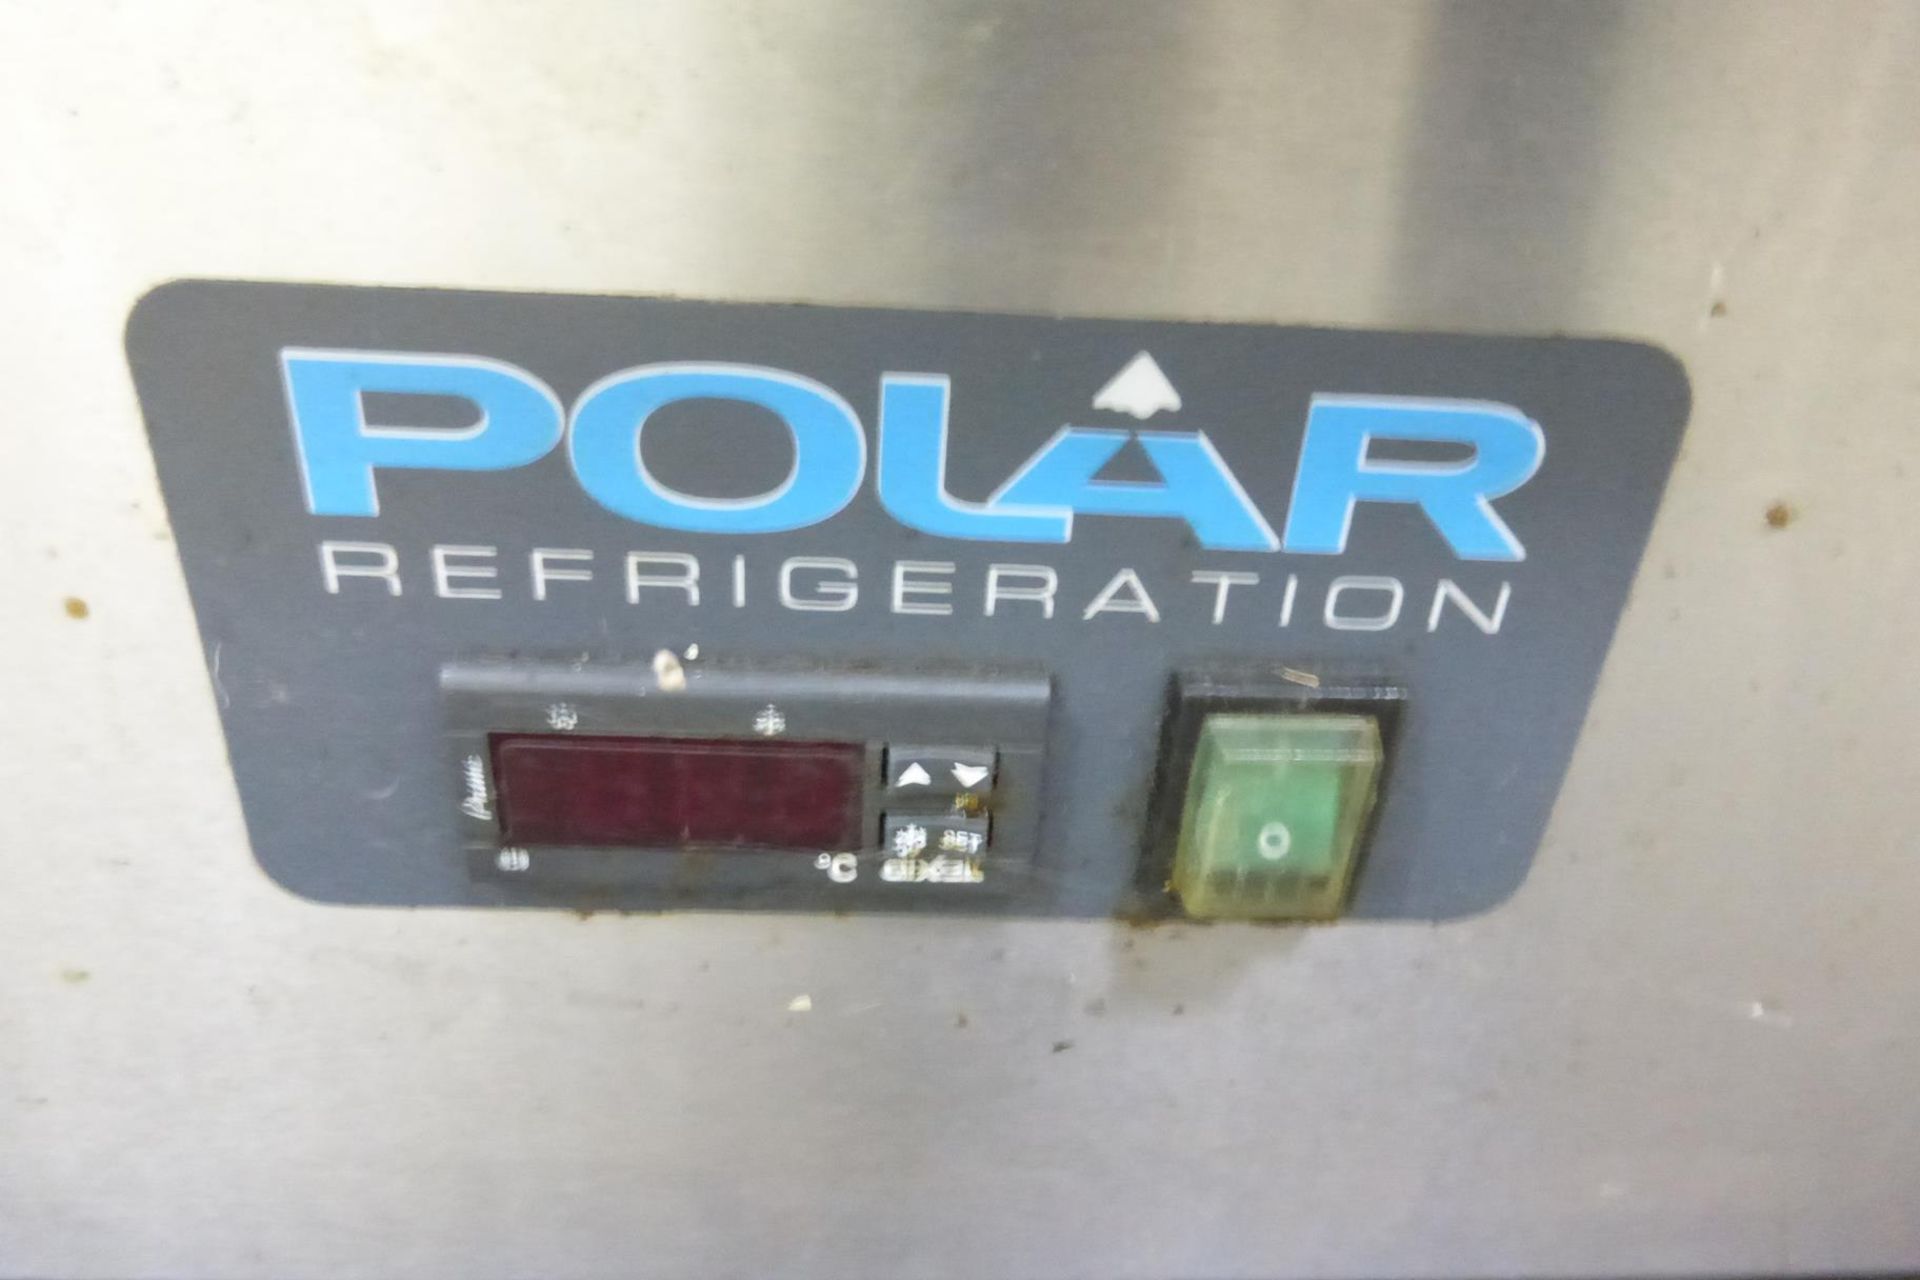 * A Polar Refrigeration Triple Stainless Steel Fridge Unit. Please note there is a £10 Lift out - Image 3 of 3